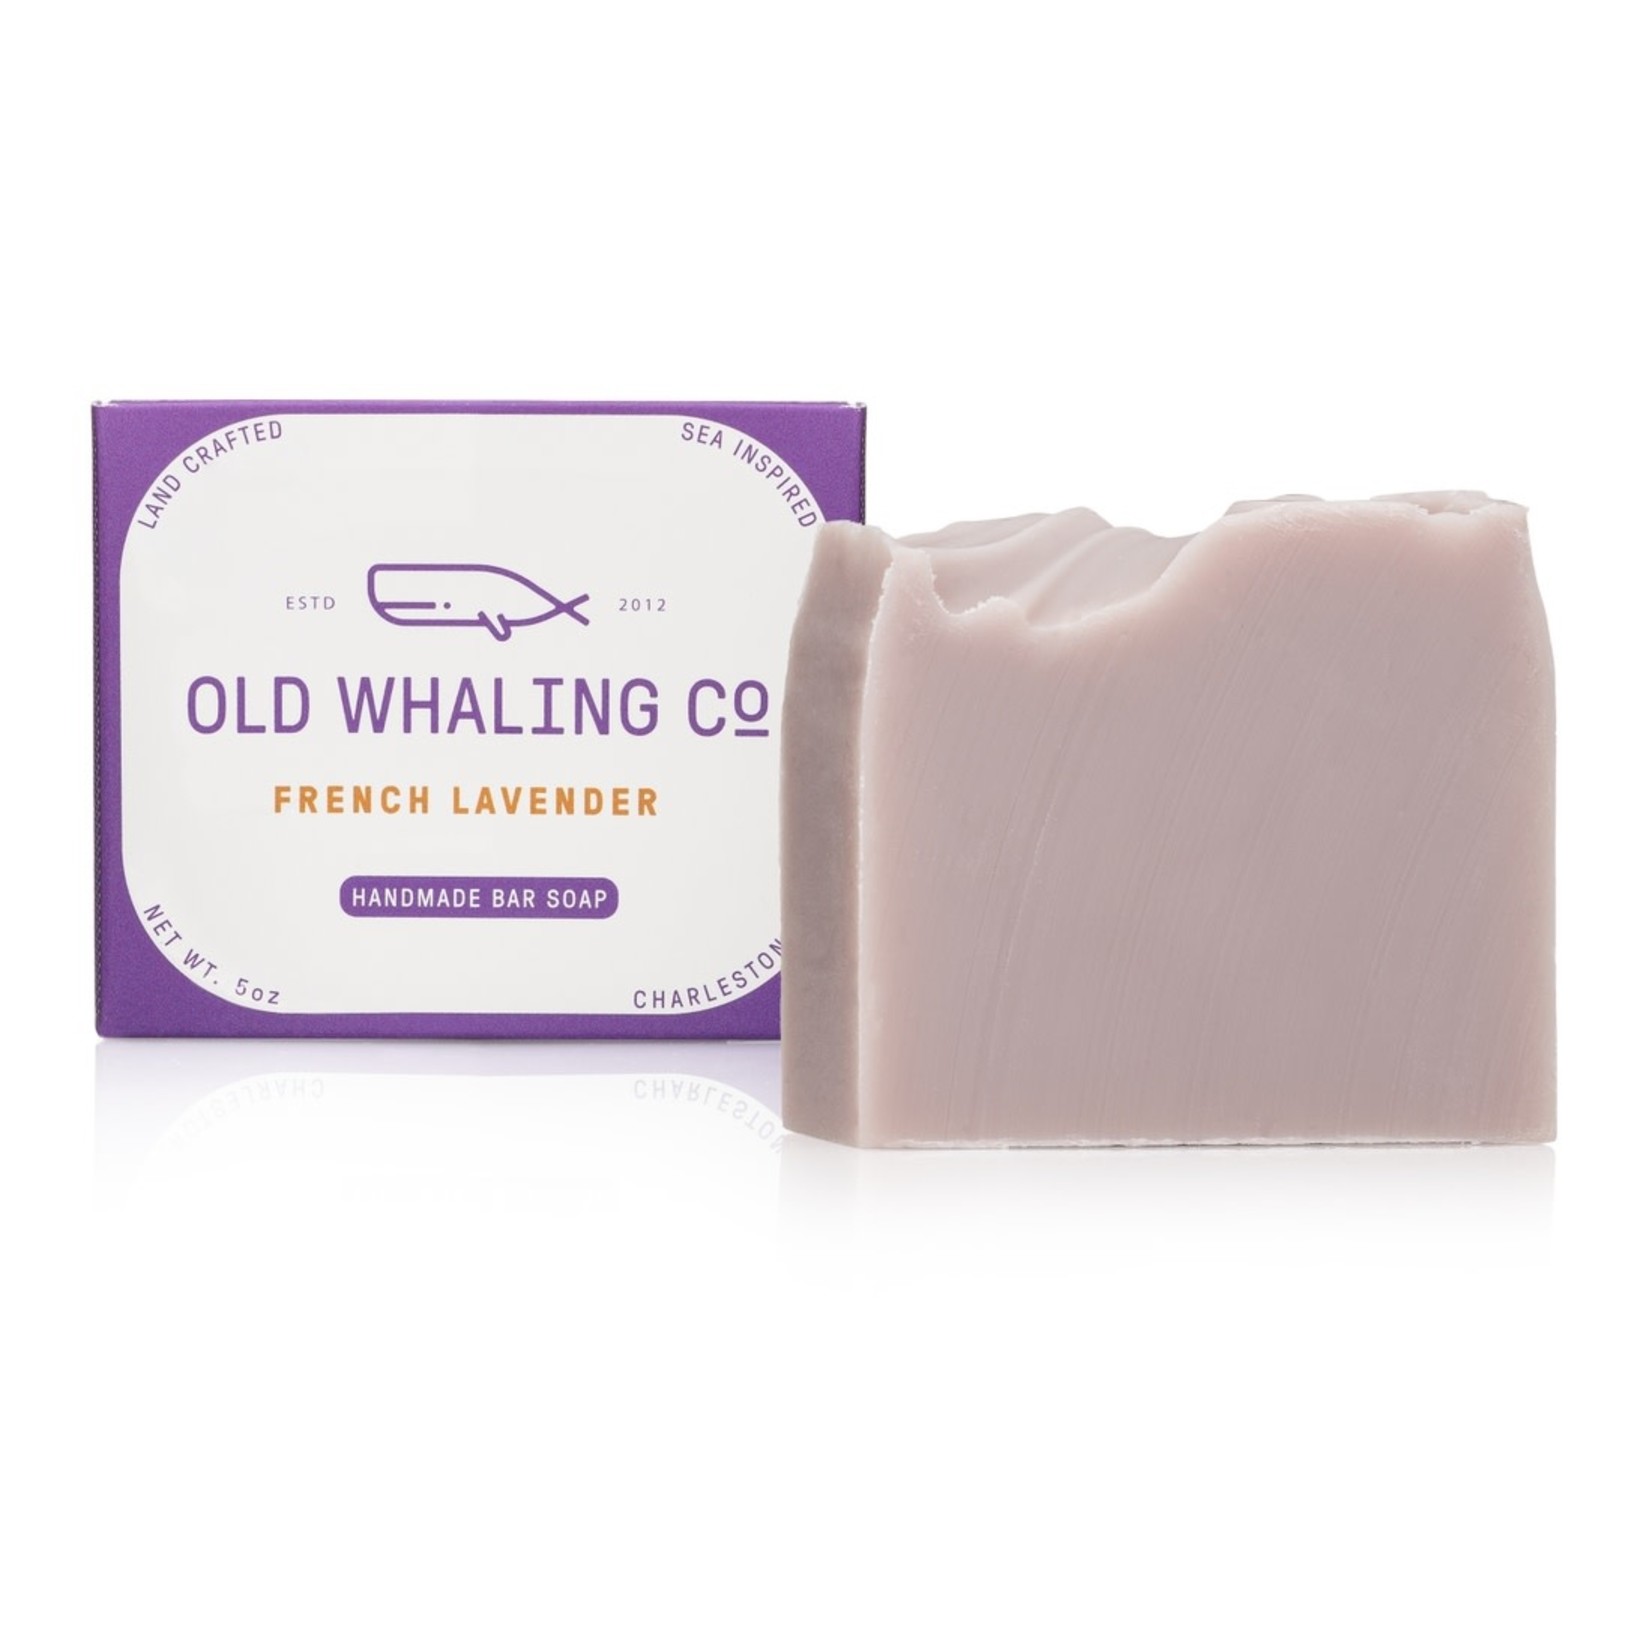 Old Whaling Company Old Whaling Company Bar Soap